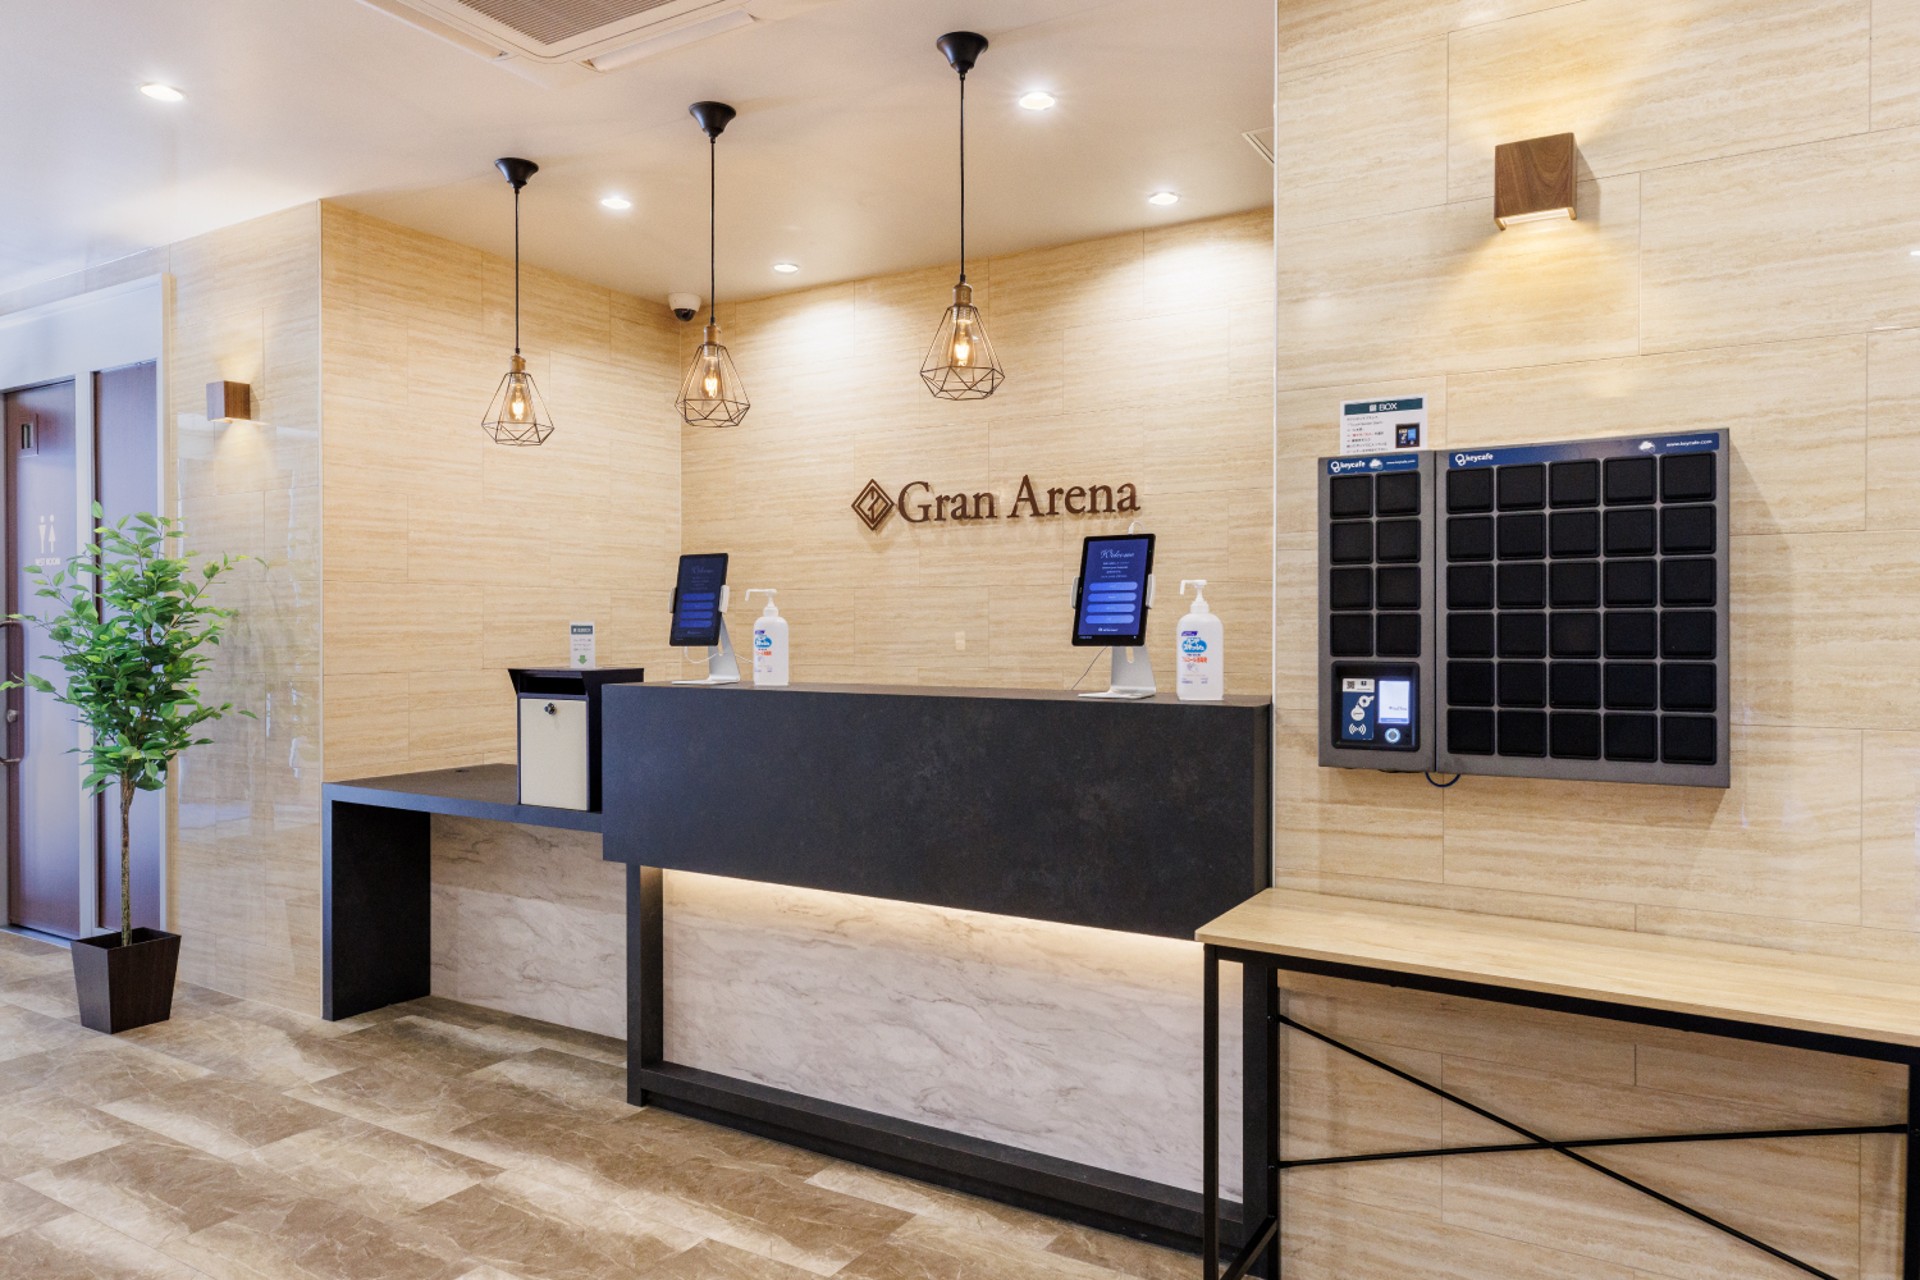 Hotel Gran Arena Lowers Costs and Increases Guest Satisfaction with Keycafe